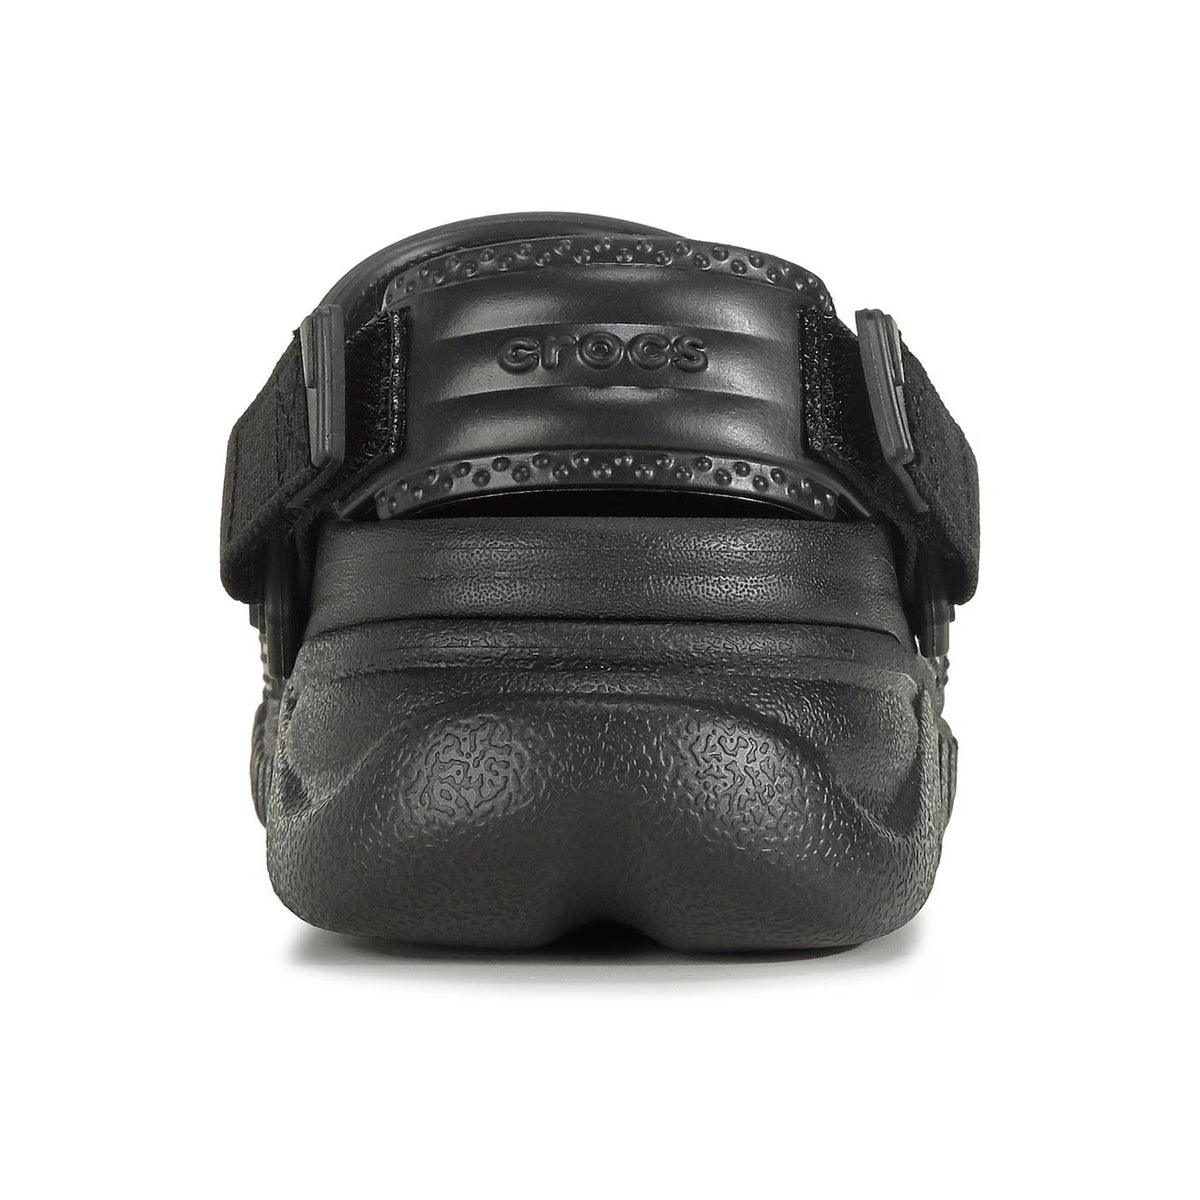 A black Crocs leather fanny pack with embossed patterns and studded detail, featuring adjustable back straps, viewed from the front.